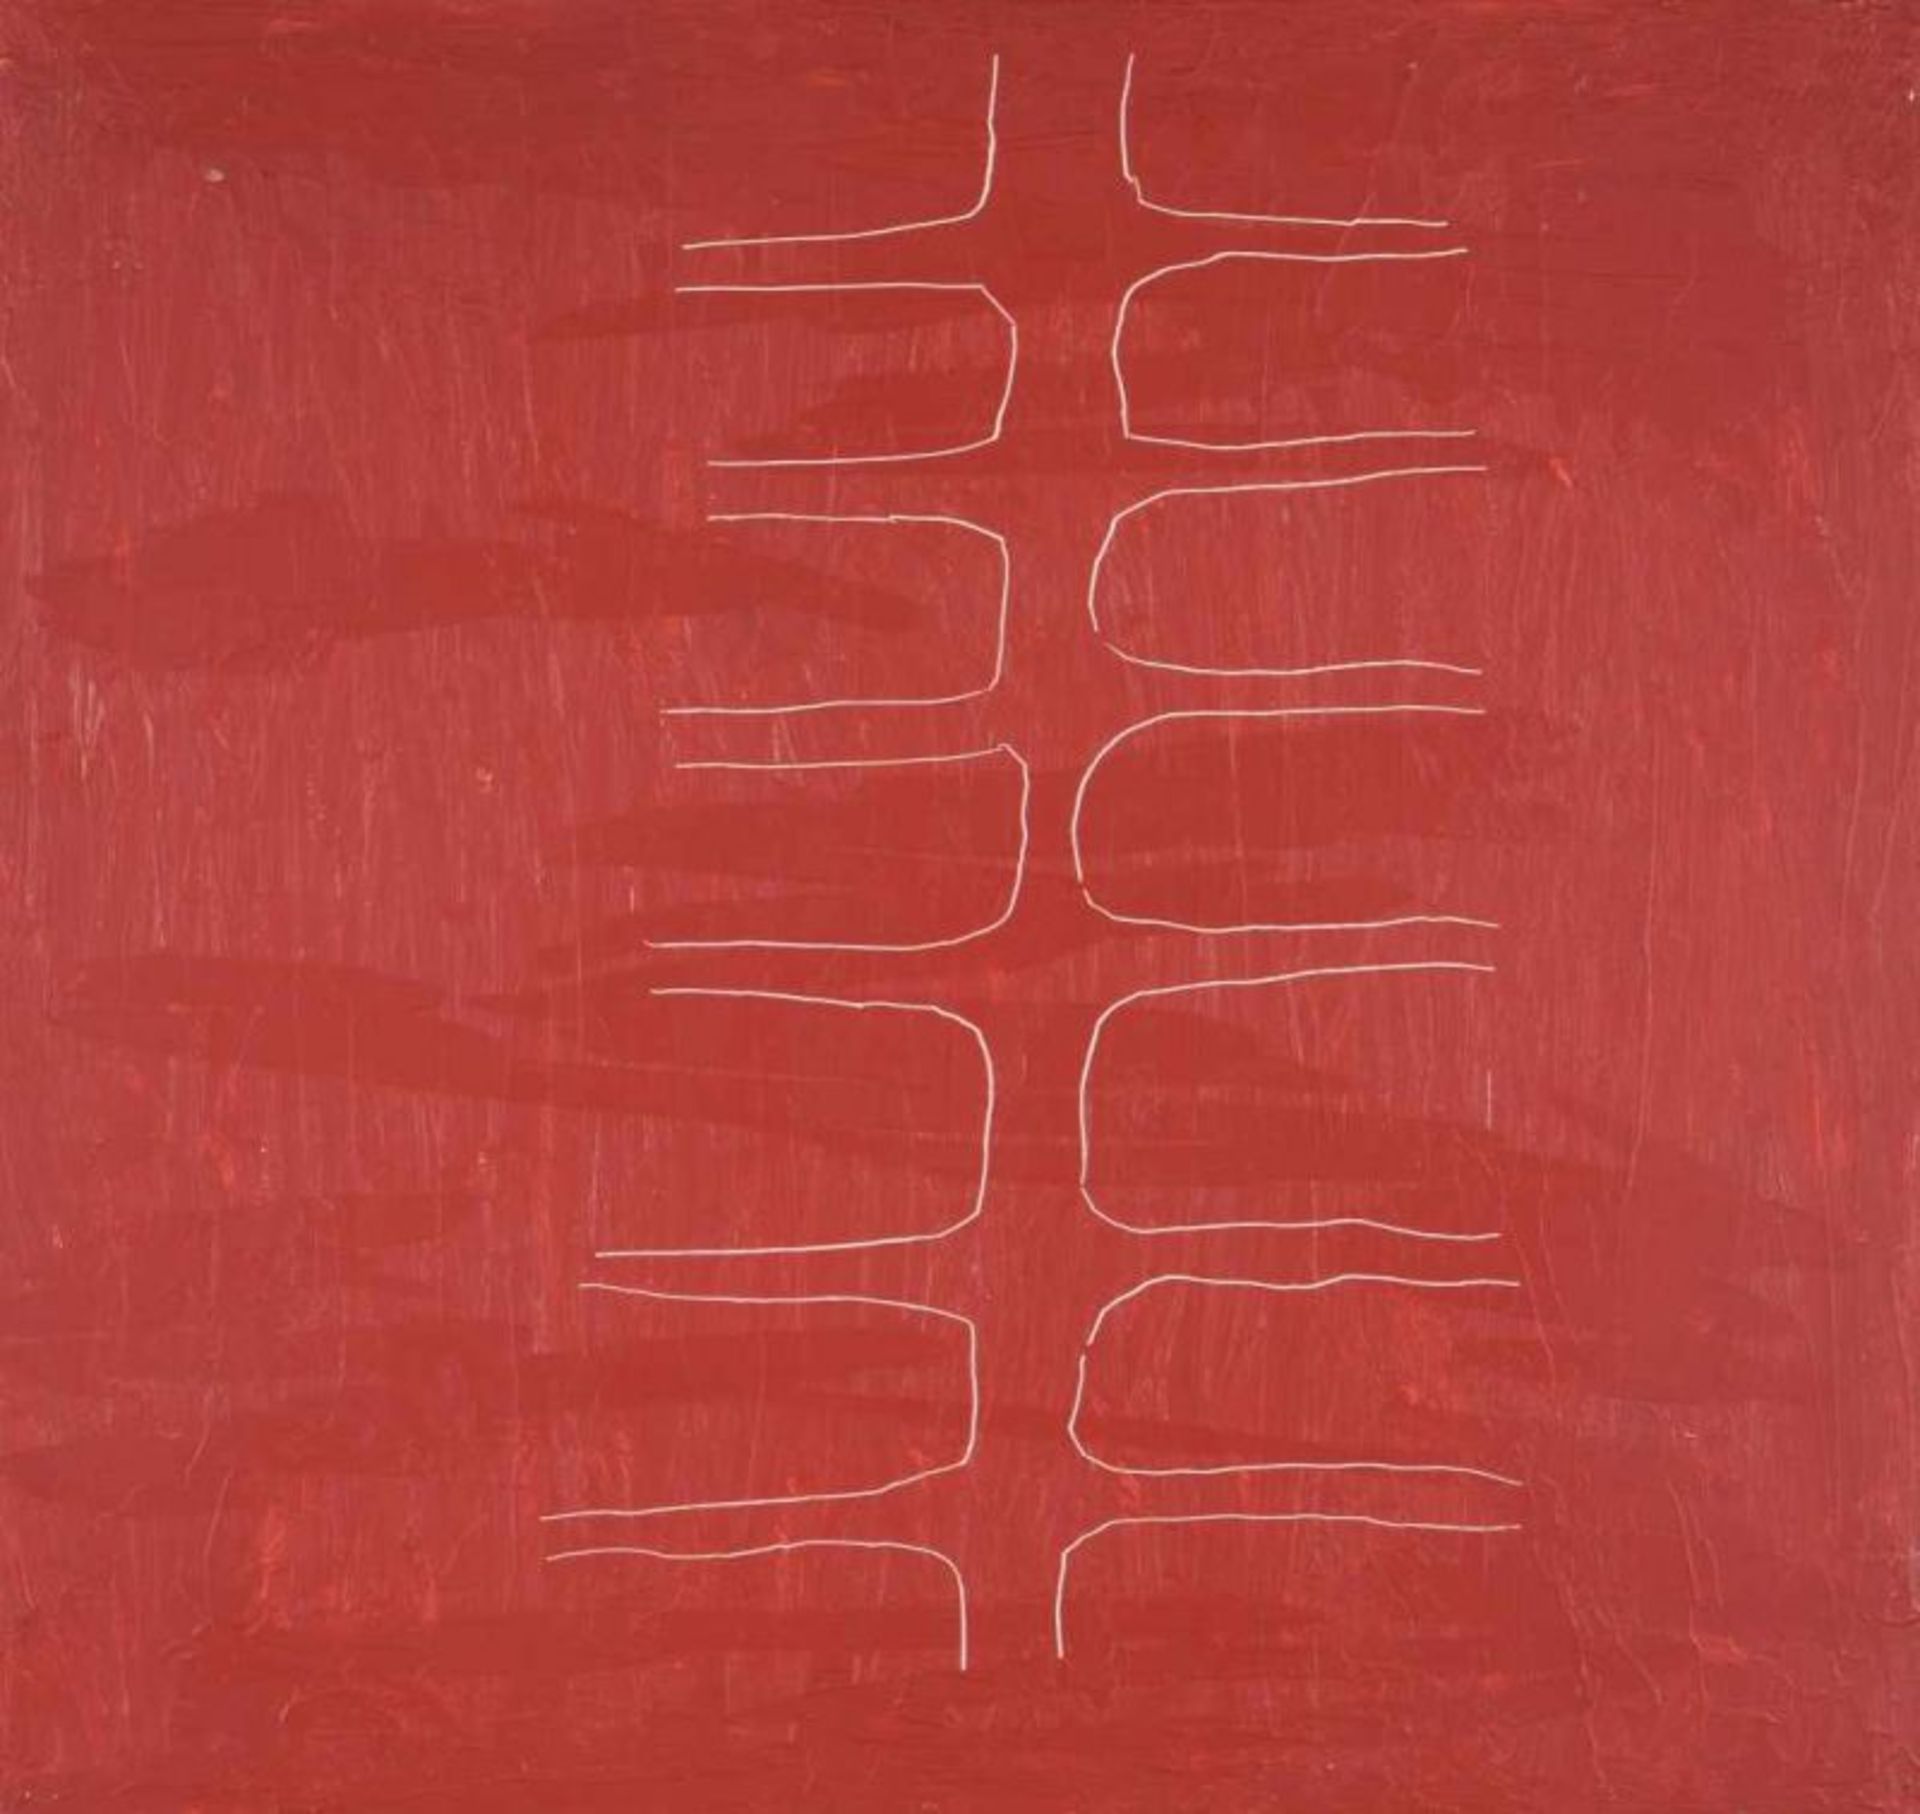 Pedro Calapez (n. 1953) Untitled Alkyd on plywood Signed and dated 1992 on the reverse 58,5x62 cm